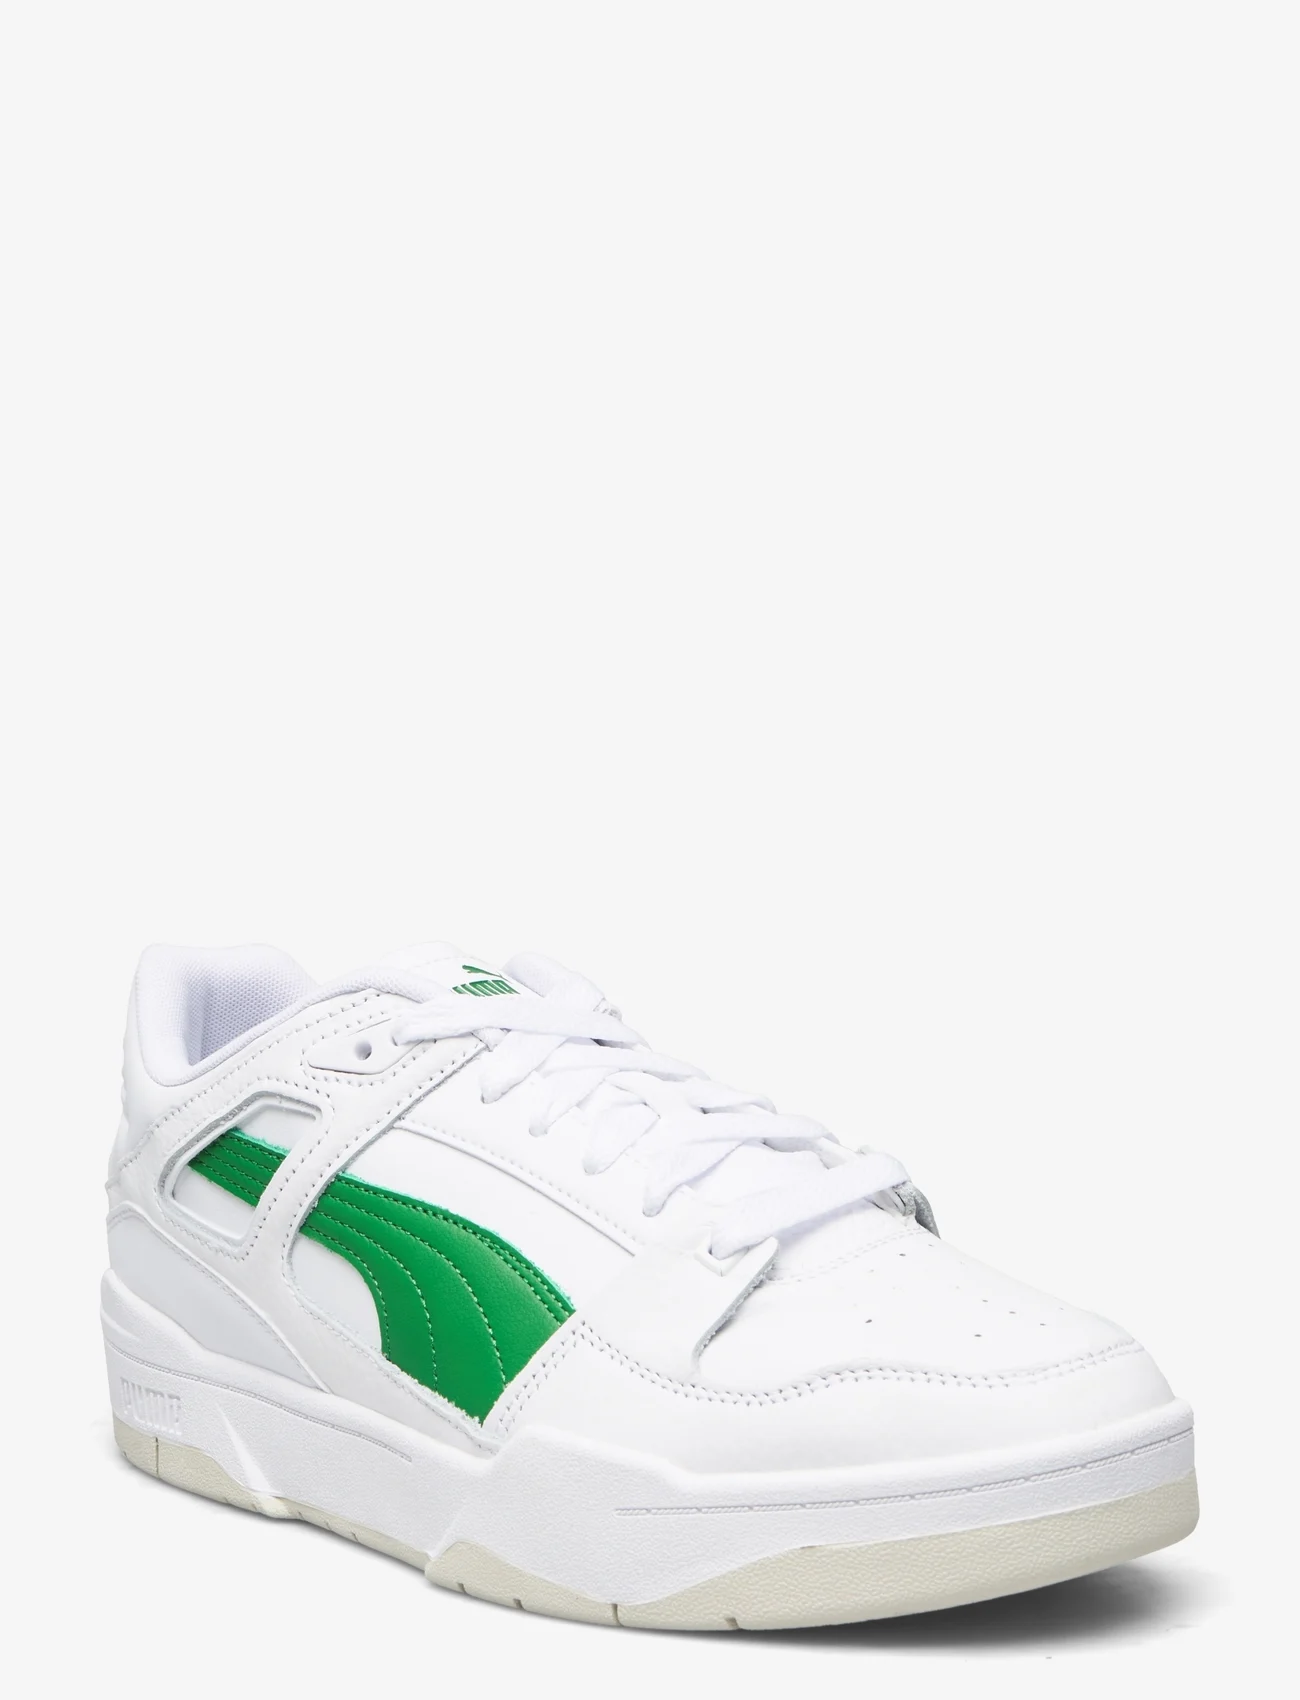 PUMA - Slipstream lth - low top sneakers - puma white-archive green - 0